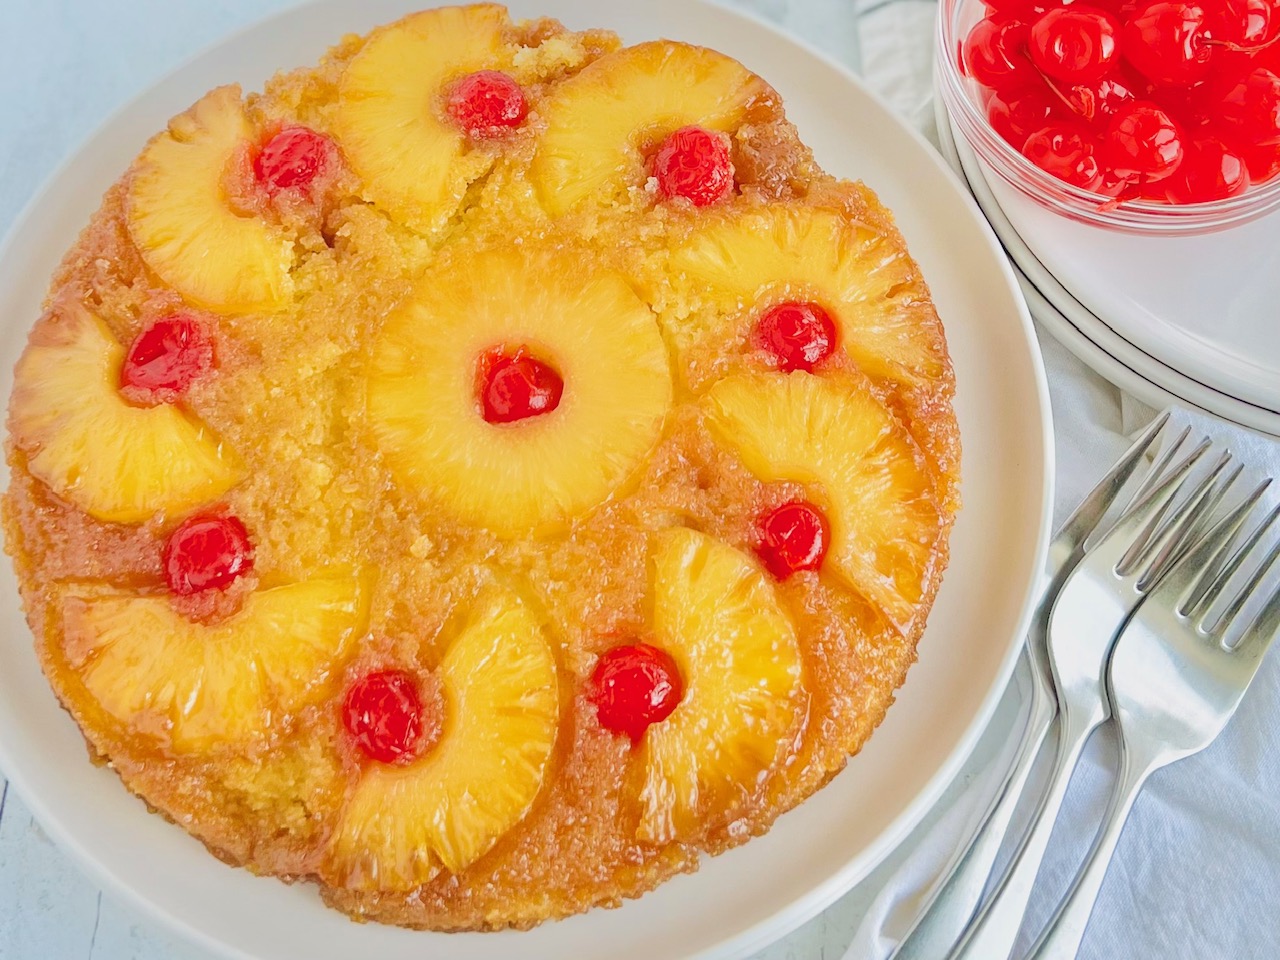 A round yellow brown cake with decorative slices of pineapple slices and red cherries on the top.